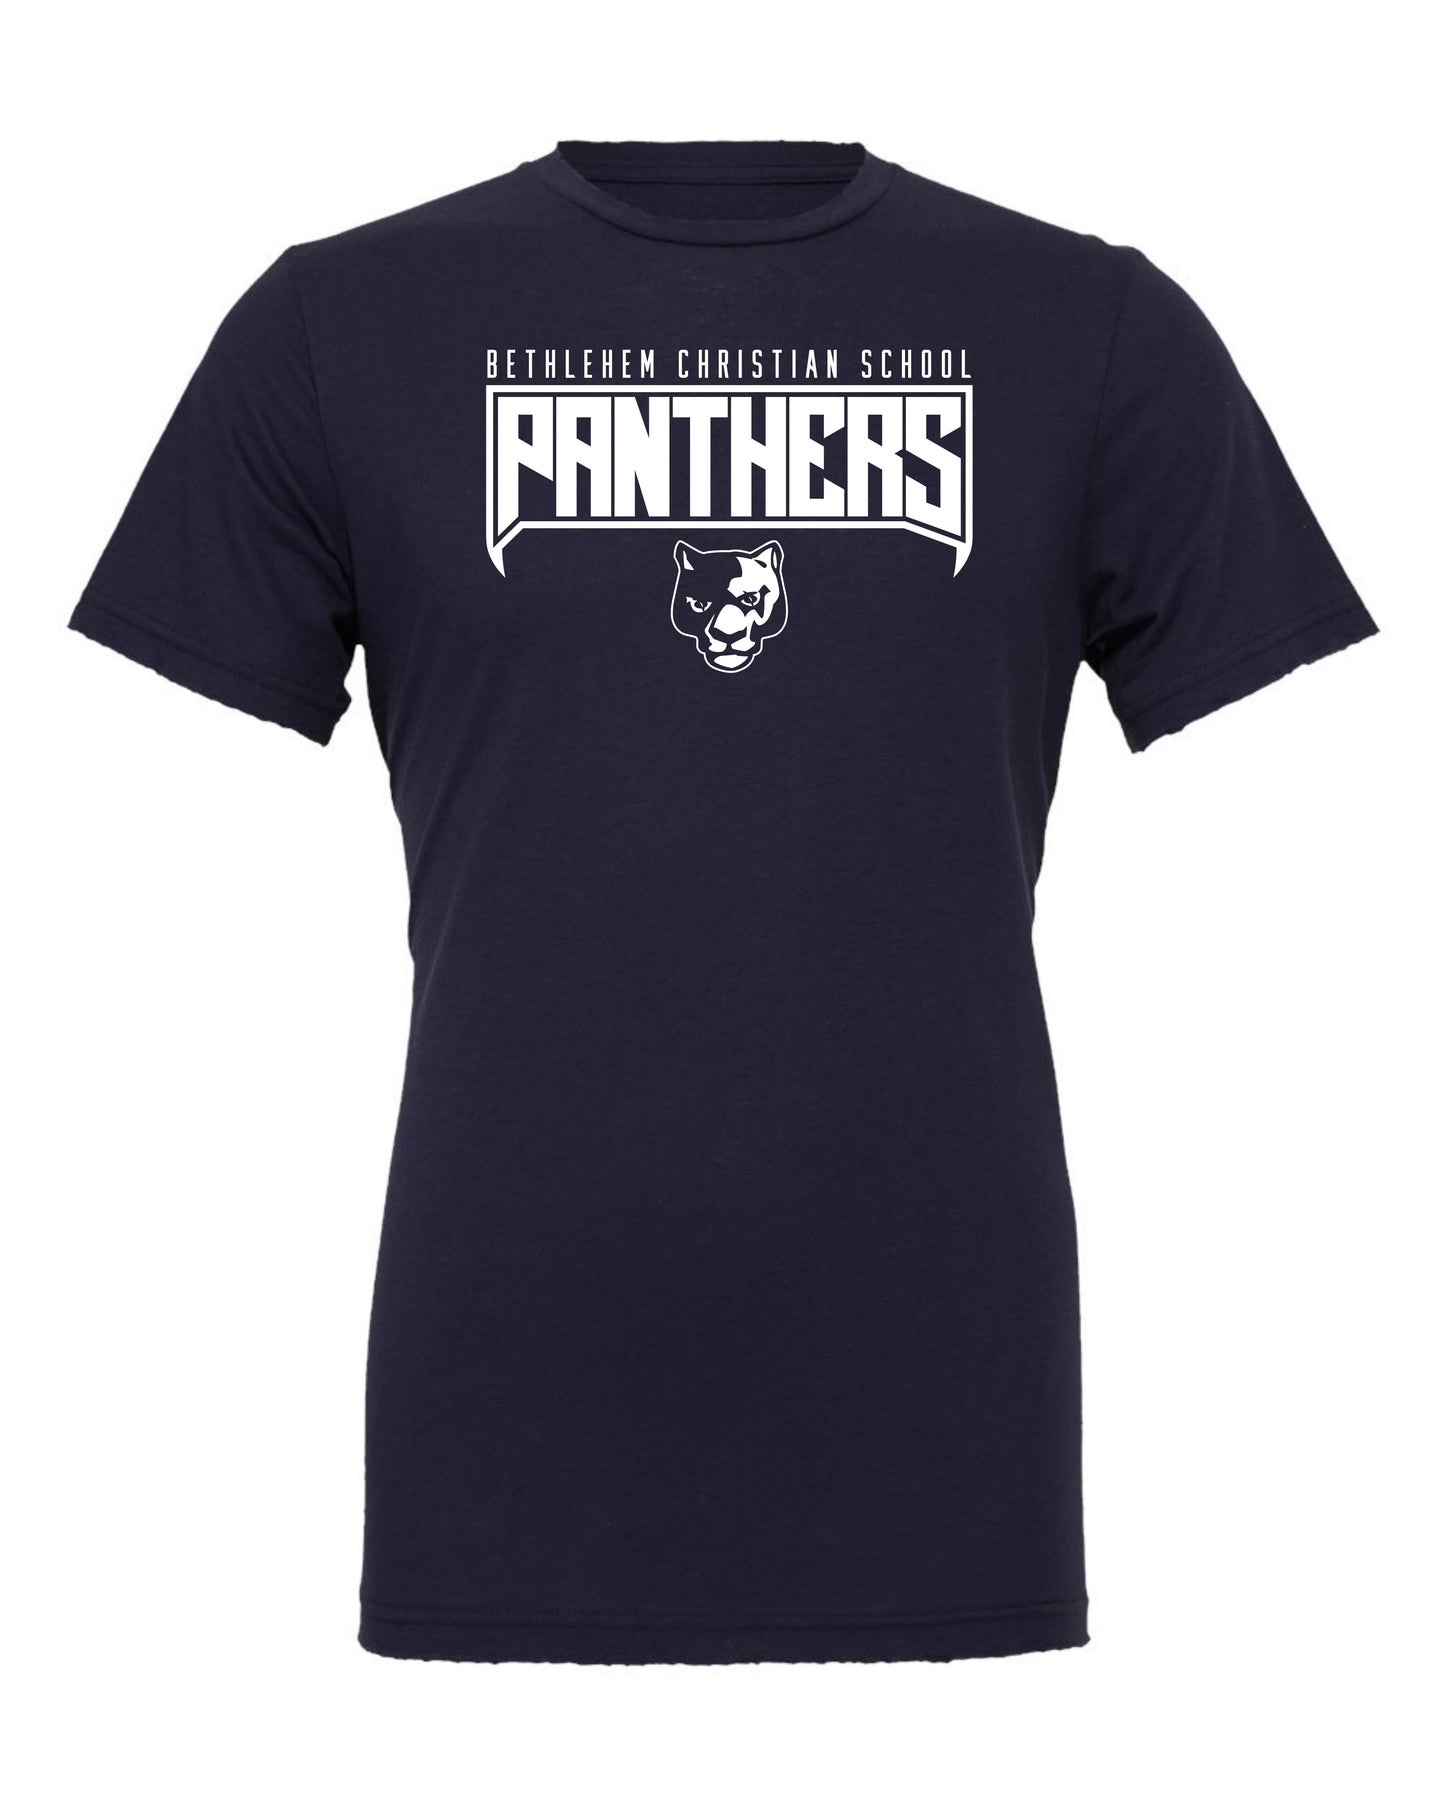 BCS Panthers Fangs - Adult Tee